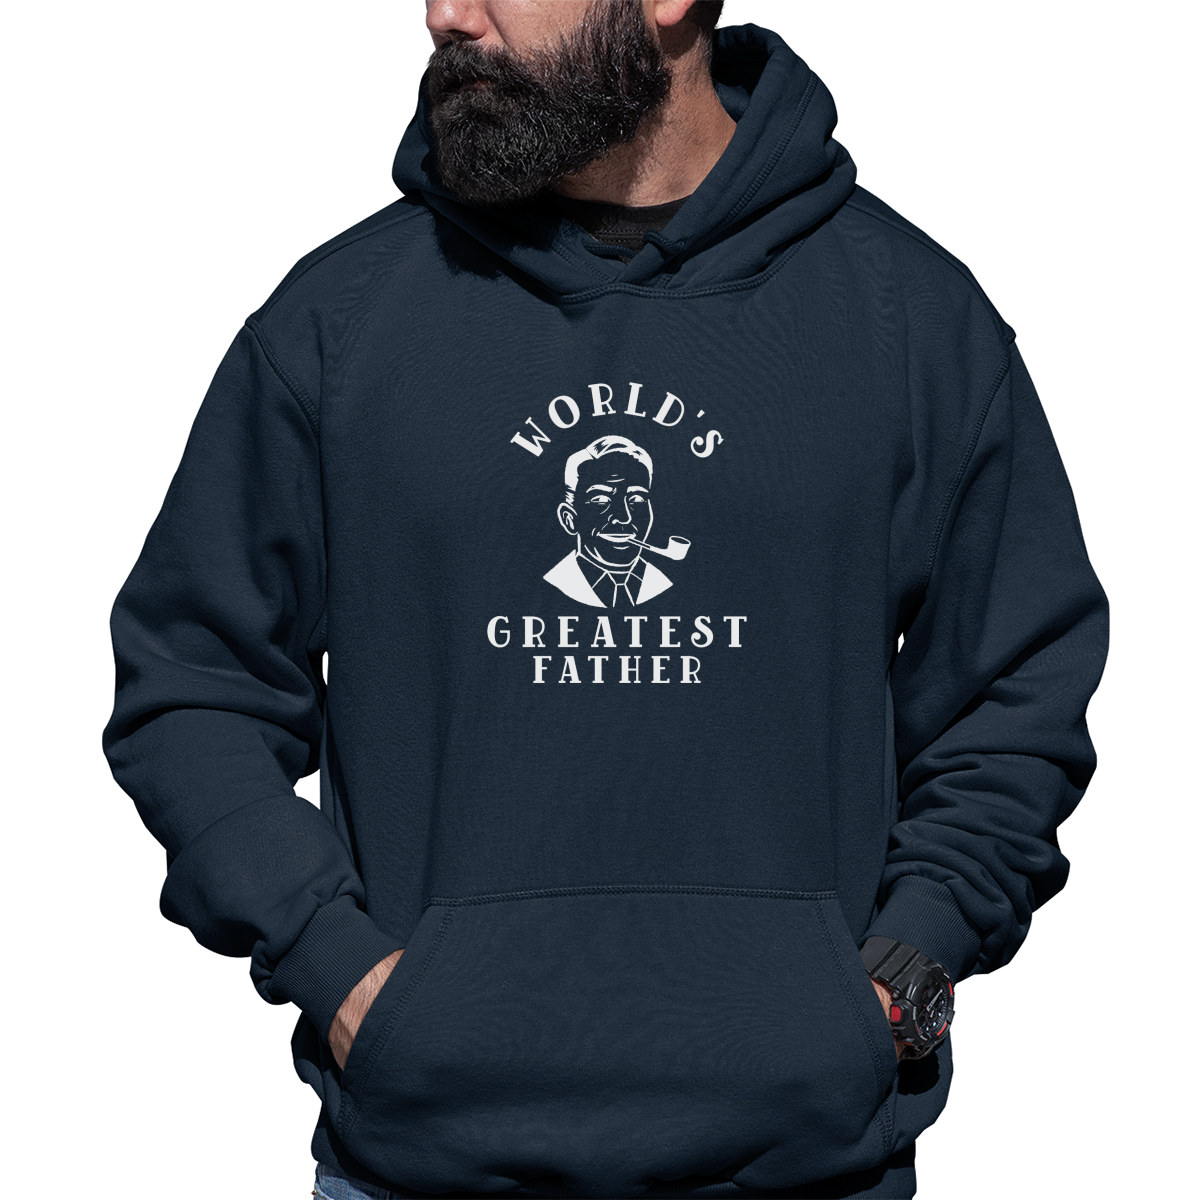 World's greatest father Unisex Hoodie | Navy